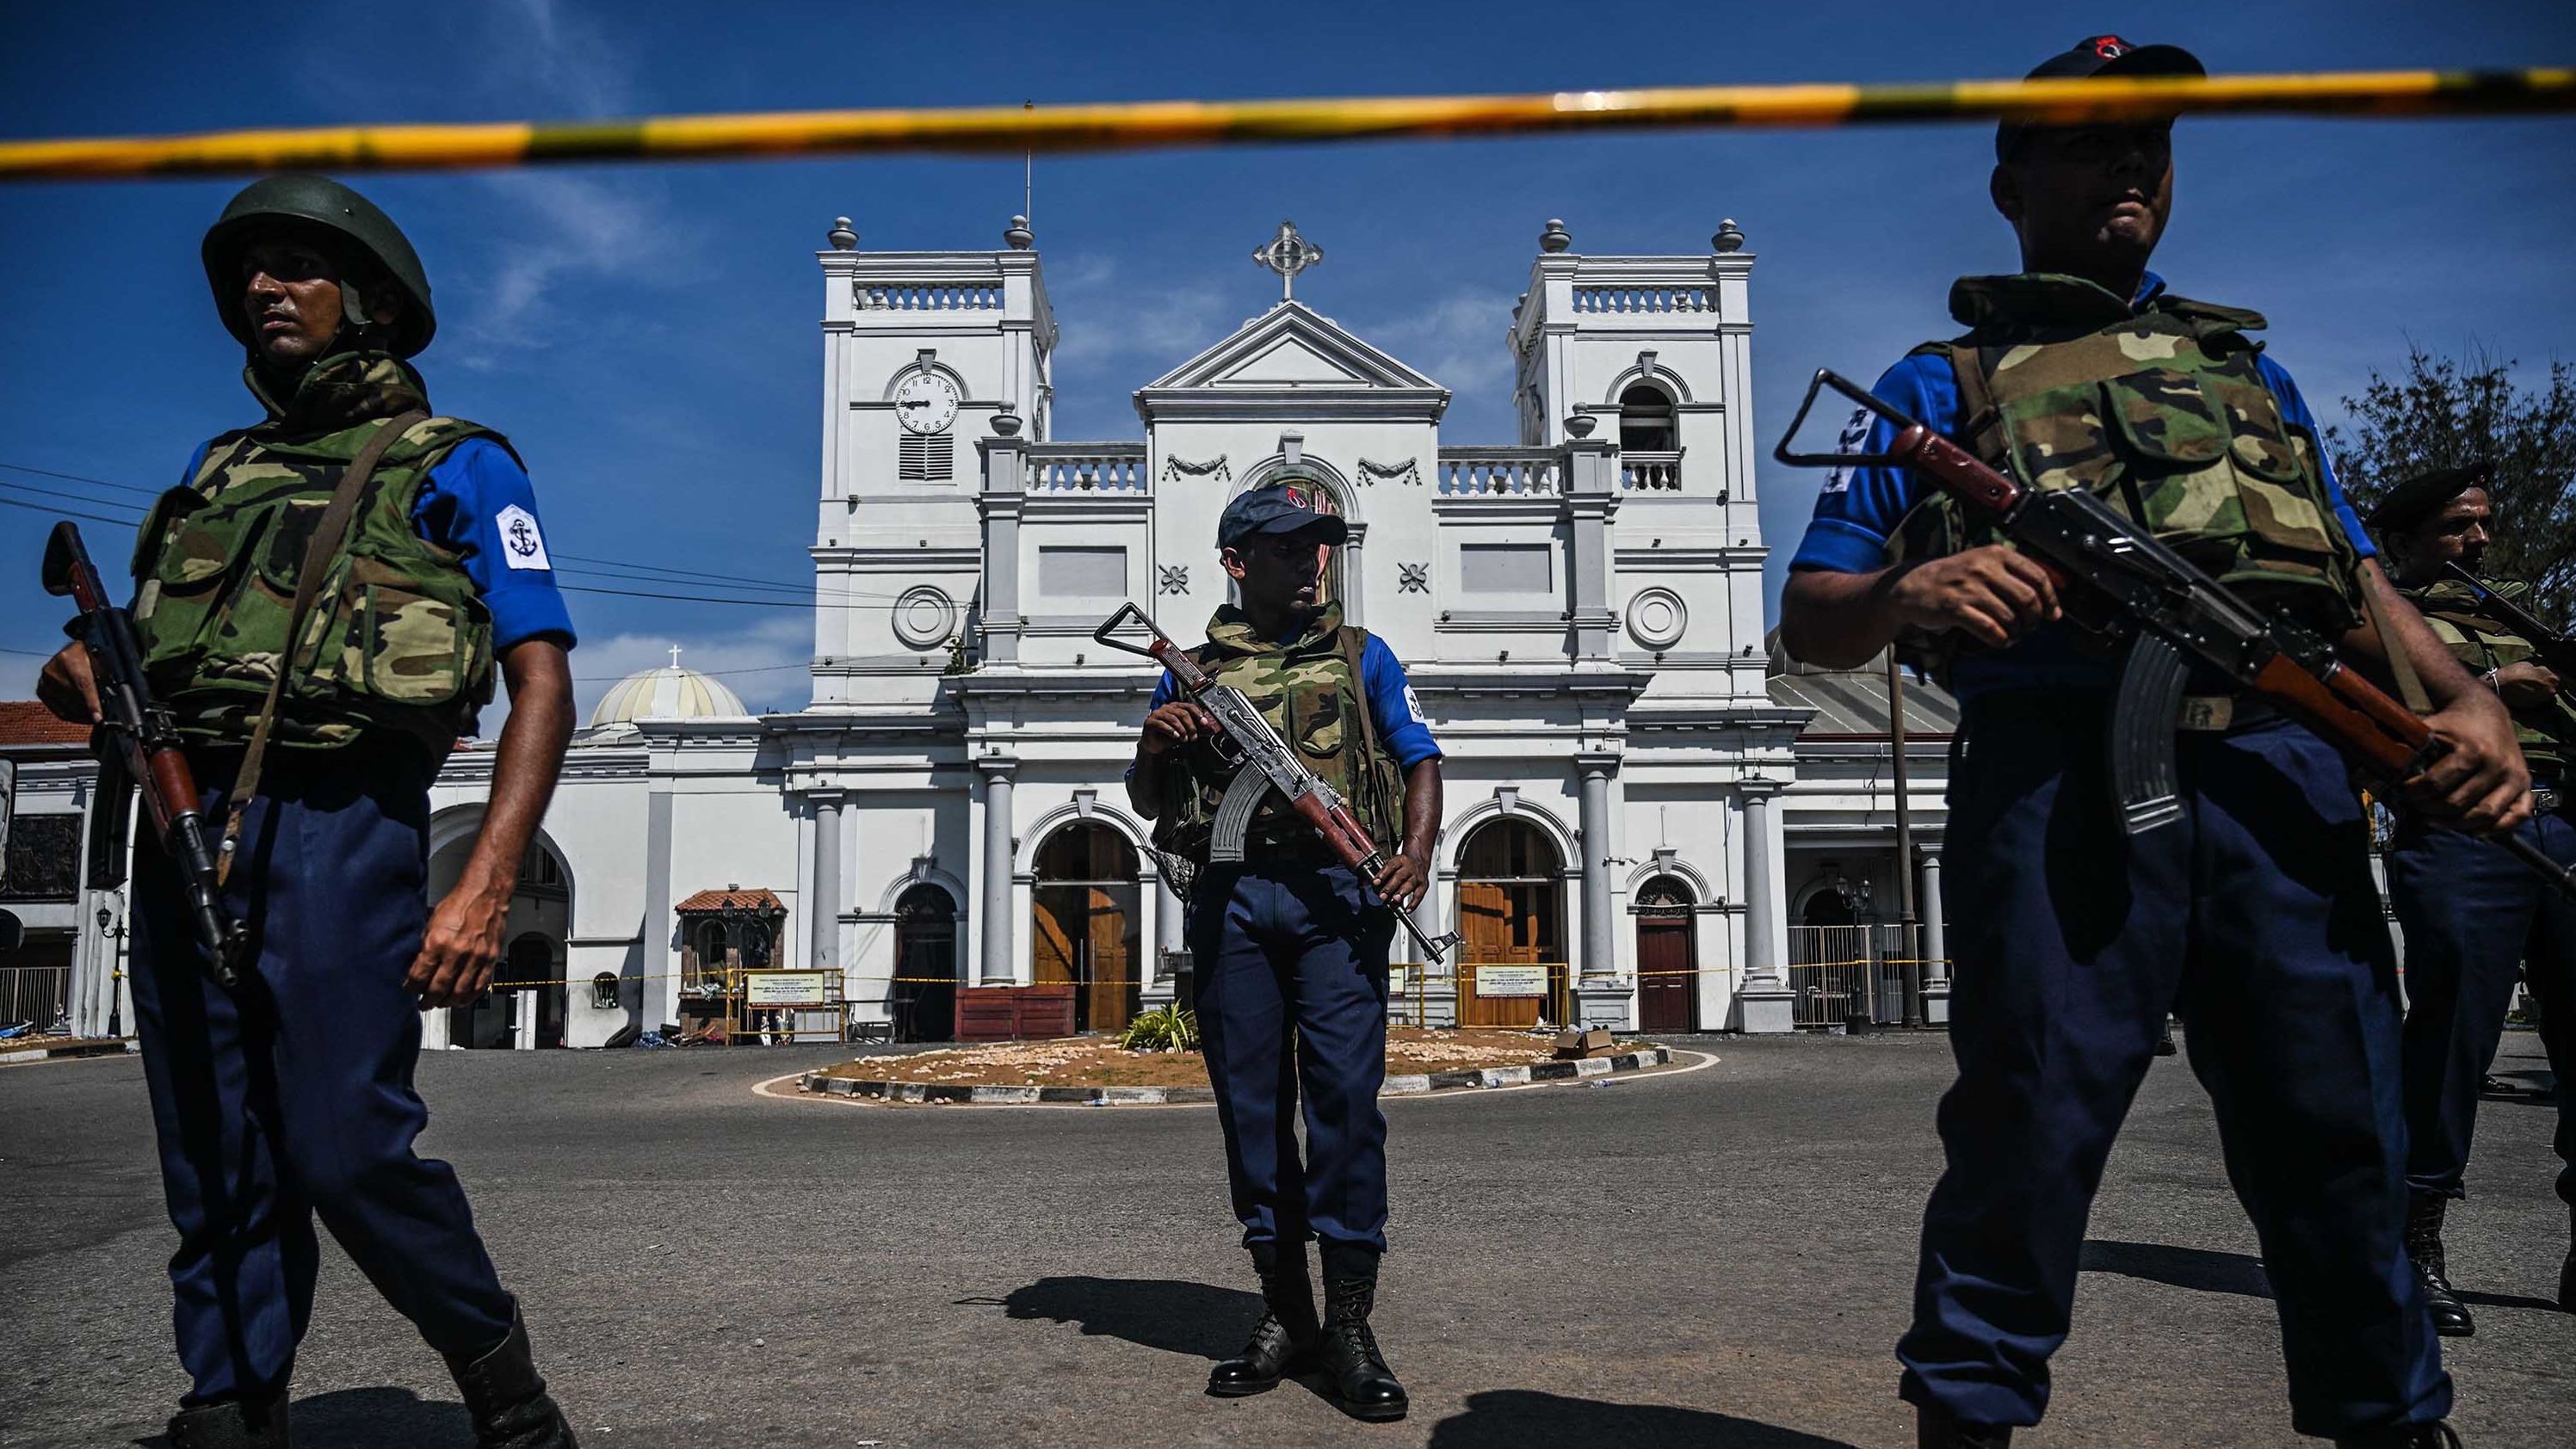 Security personnel stand guard outside St. Anthony's Shrine on Monday, a day after the church was hit in a series of bomb blasts targeting churches and luxury hotels in Sri Lanka.